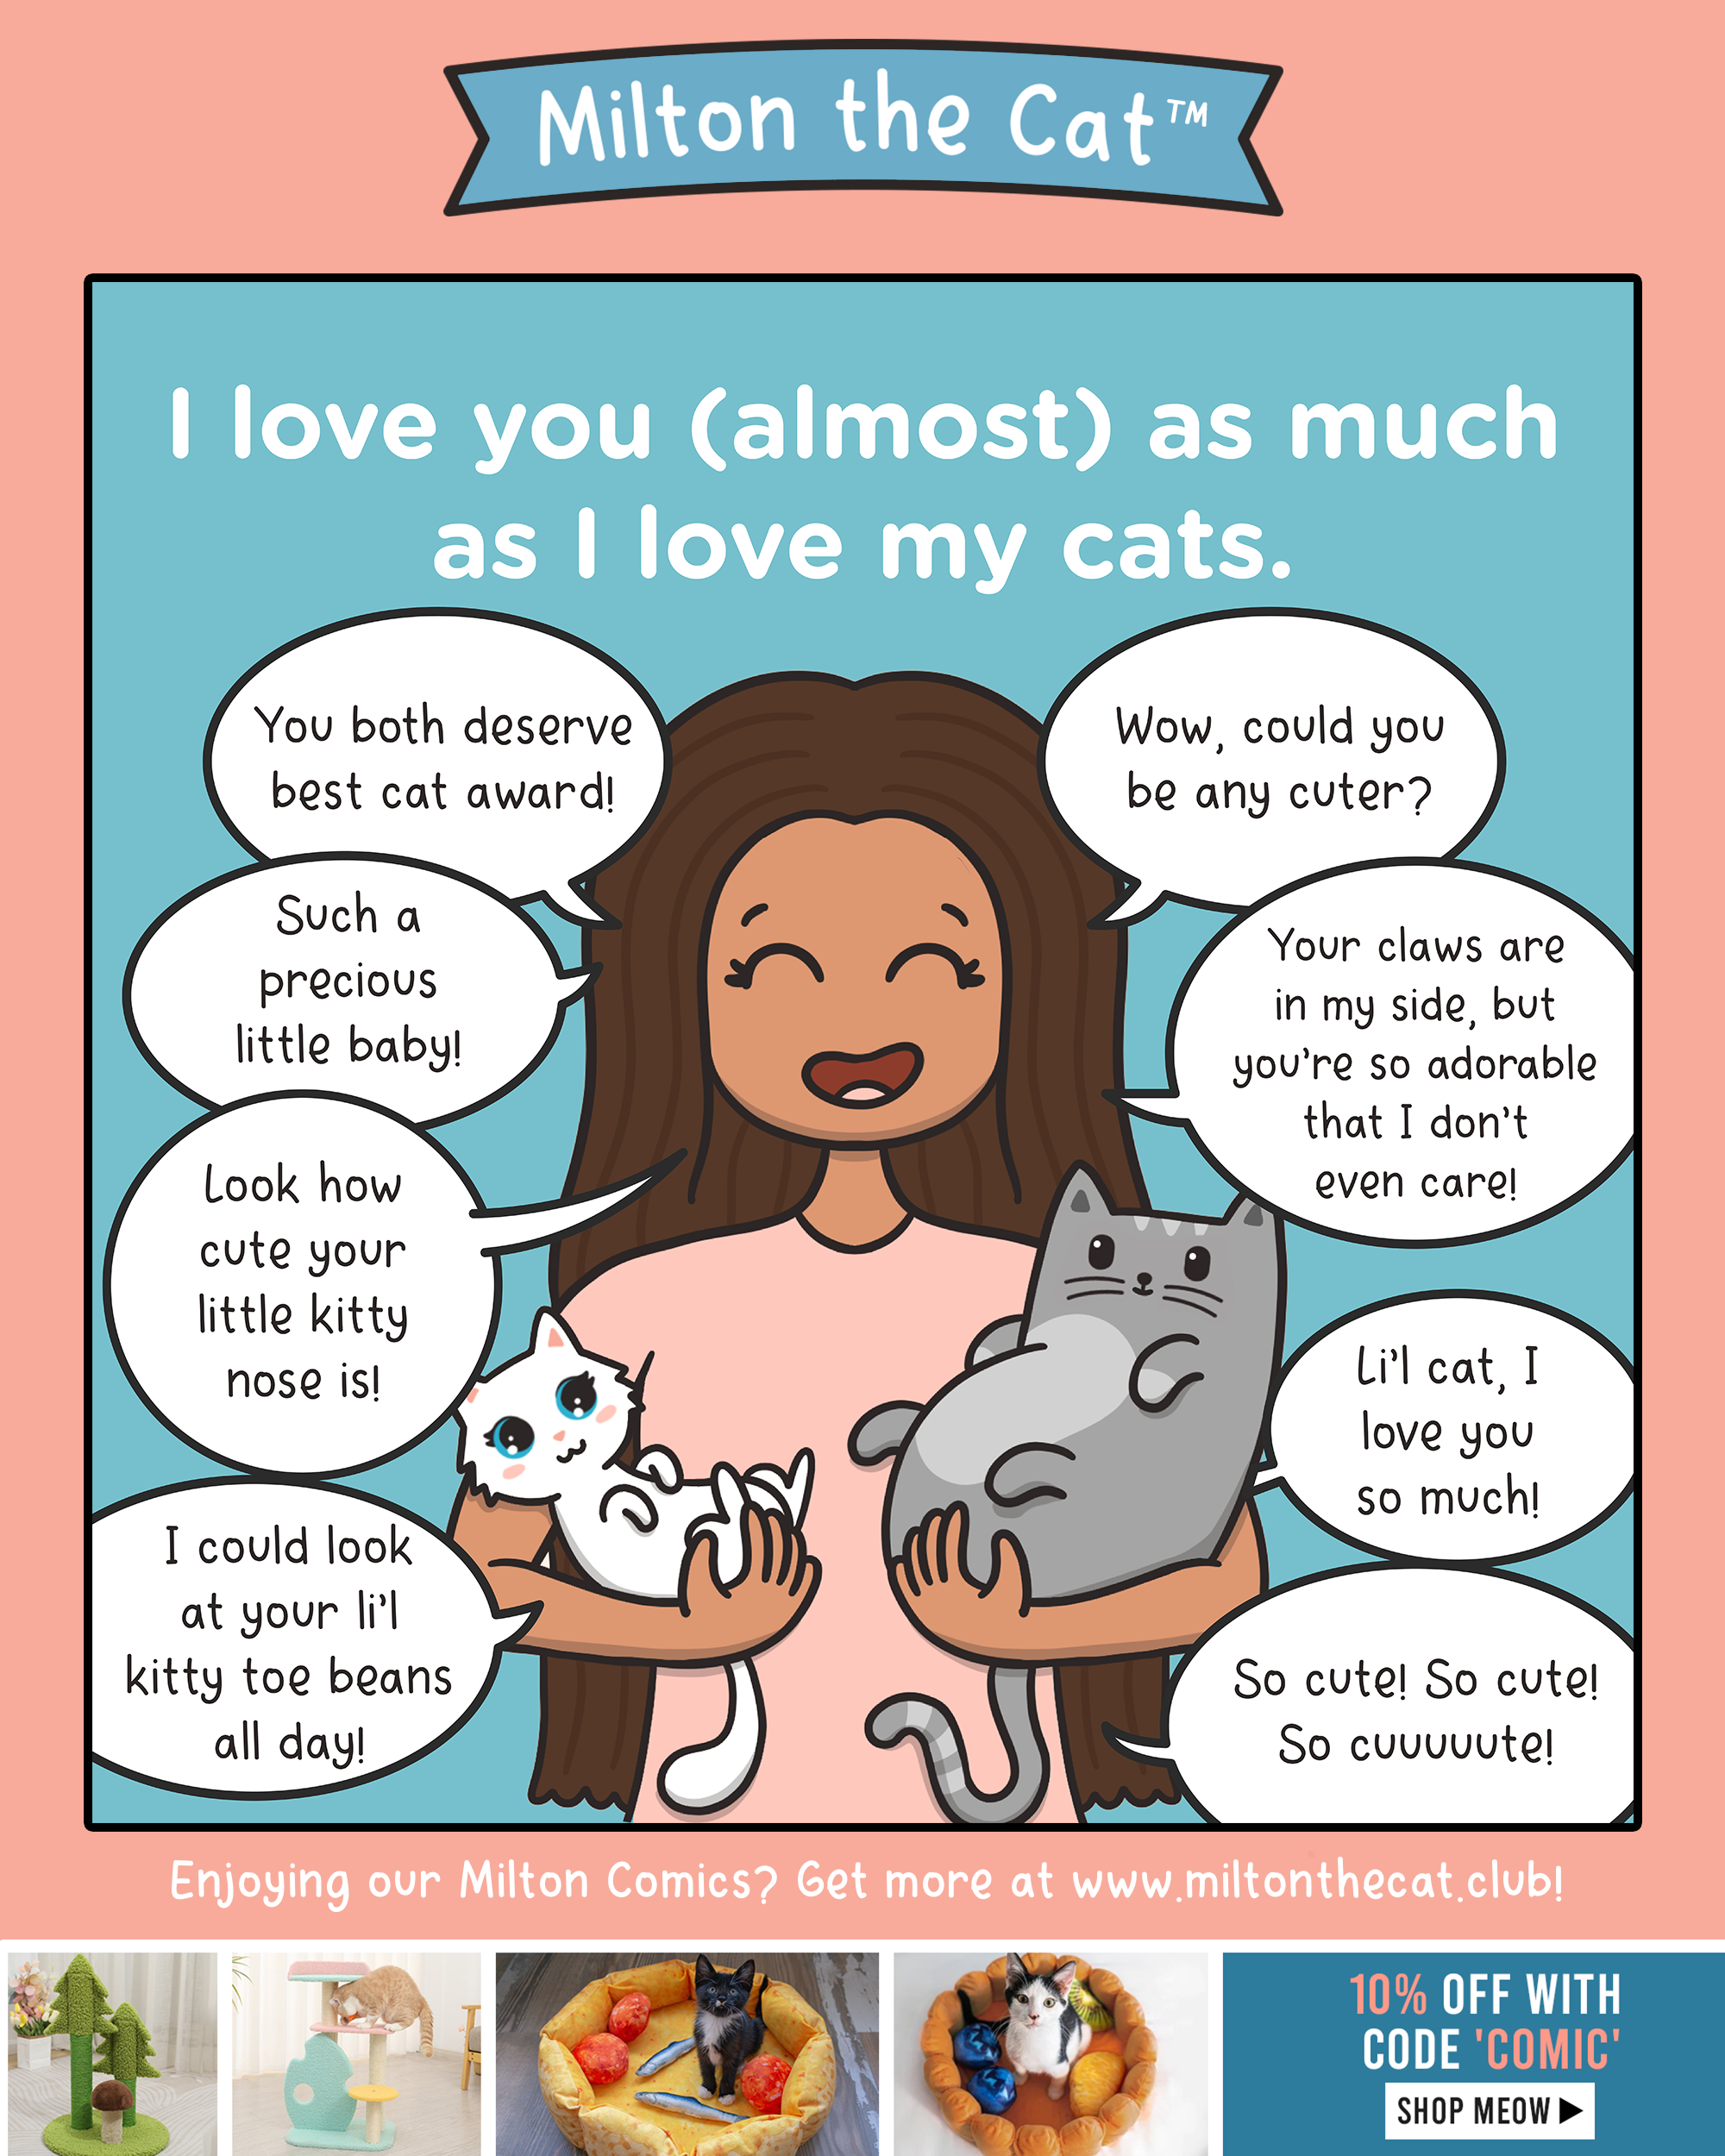 A brown-haired girl in a pink shirt holds 2 cats in her arms like babies. A fluffy white kitten and a fat gray tabby cat. Text: I love you (almost) as much as I love my cats.